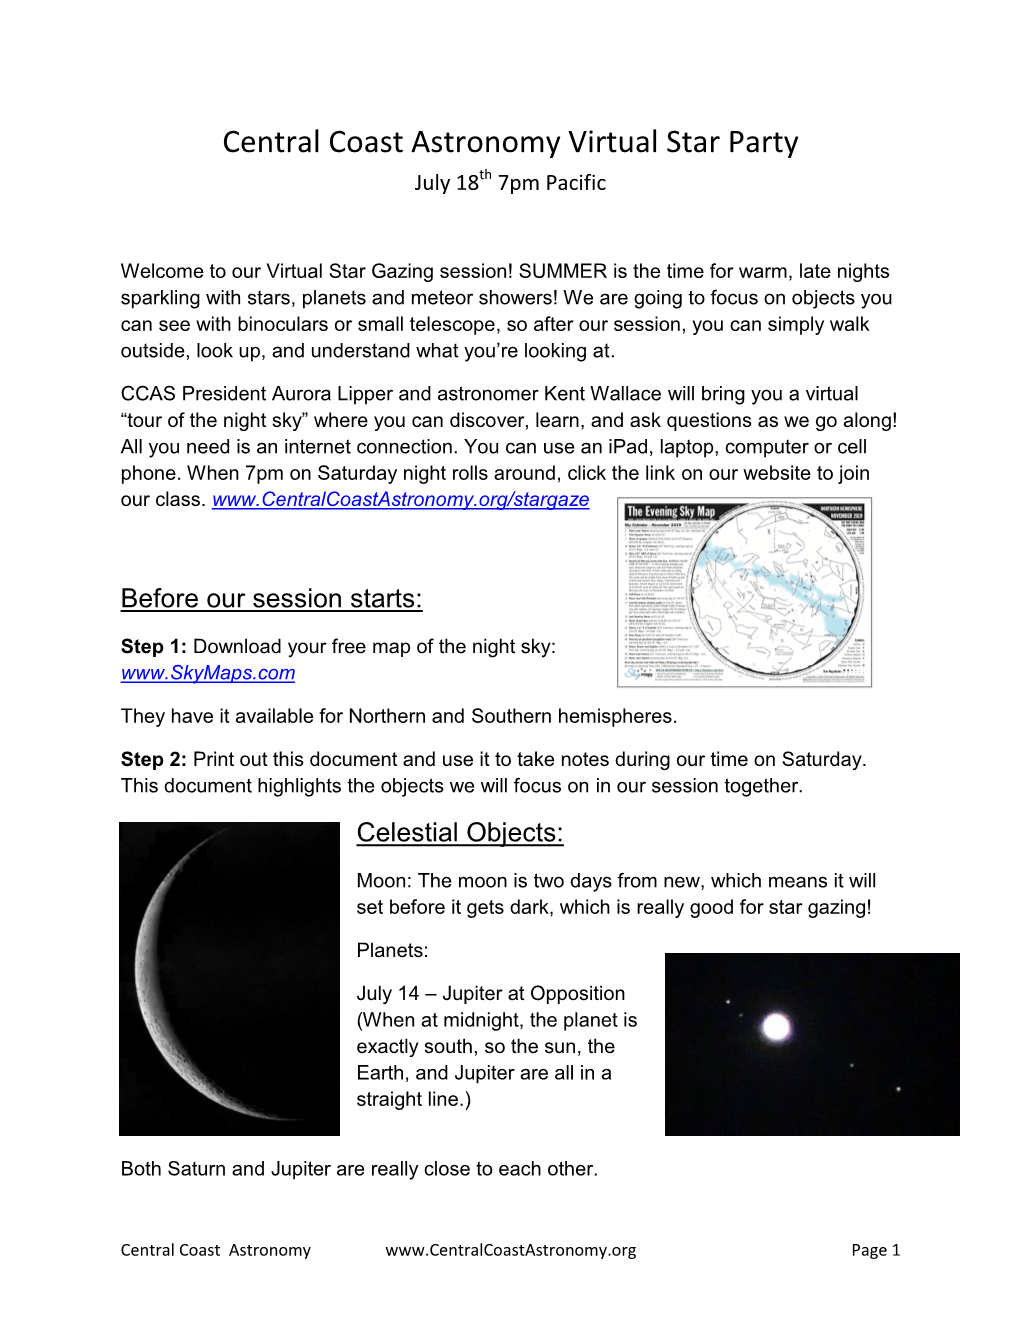 Central Coast Astronomy Virtual Star Party Th July 18 7Pm Pacific